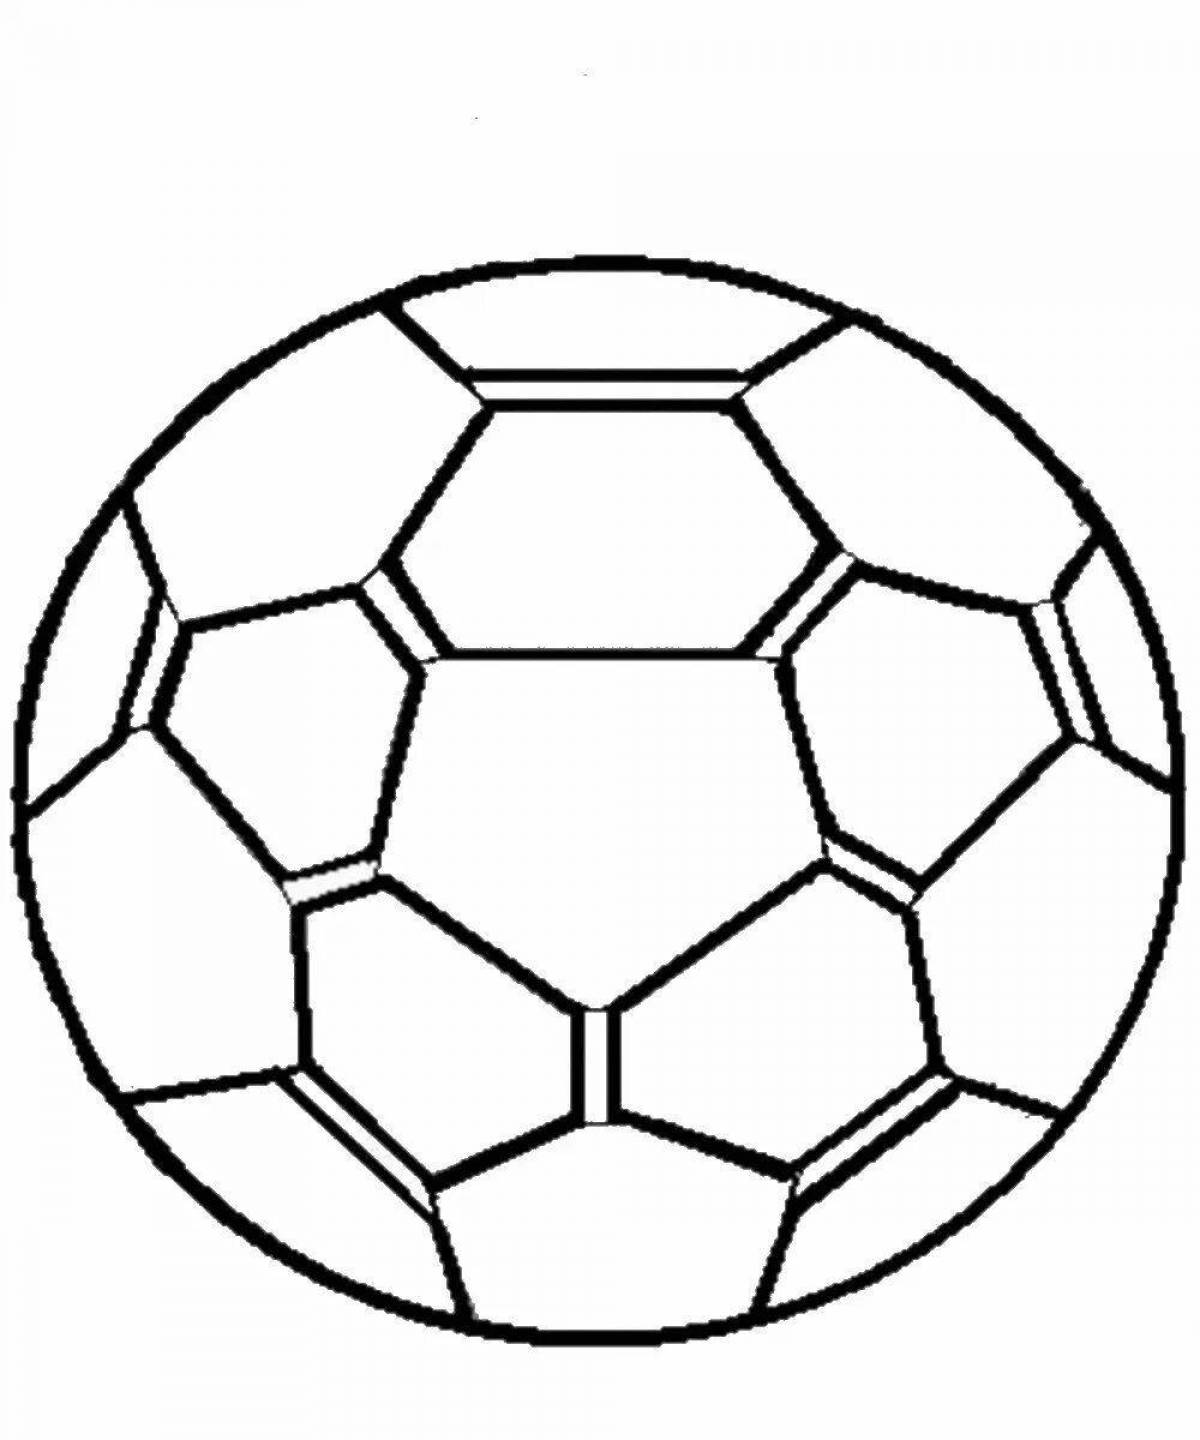 Colorful bright soccer ball coloring page for kids